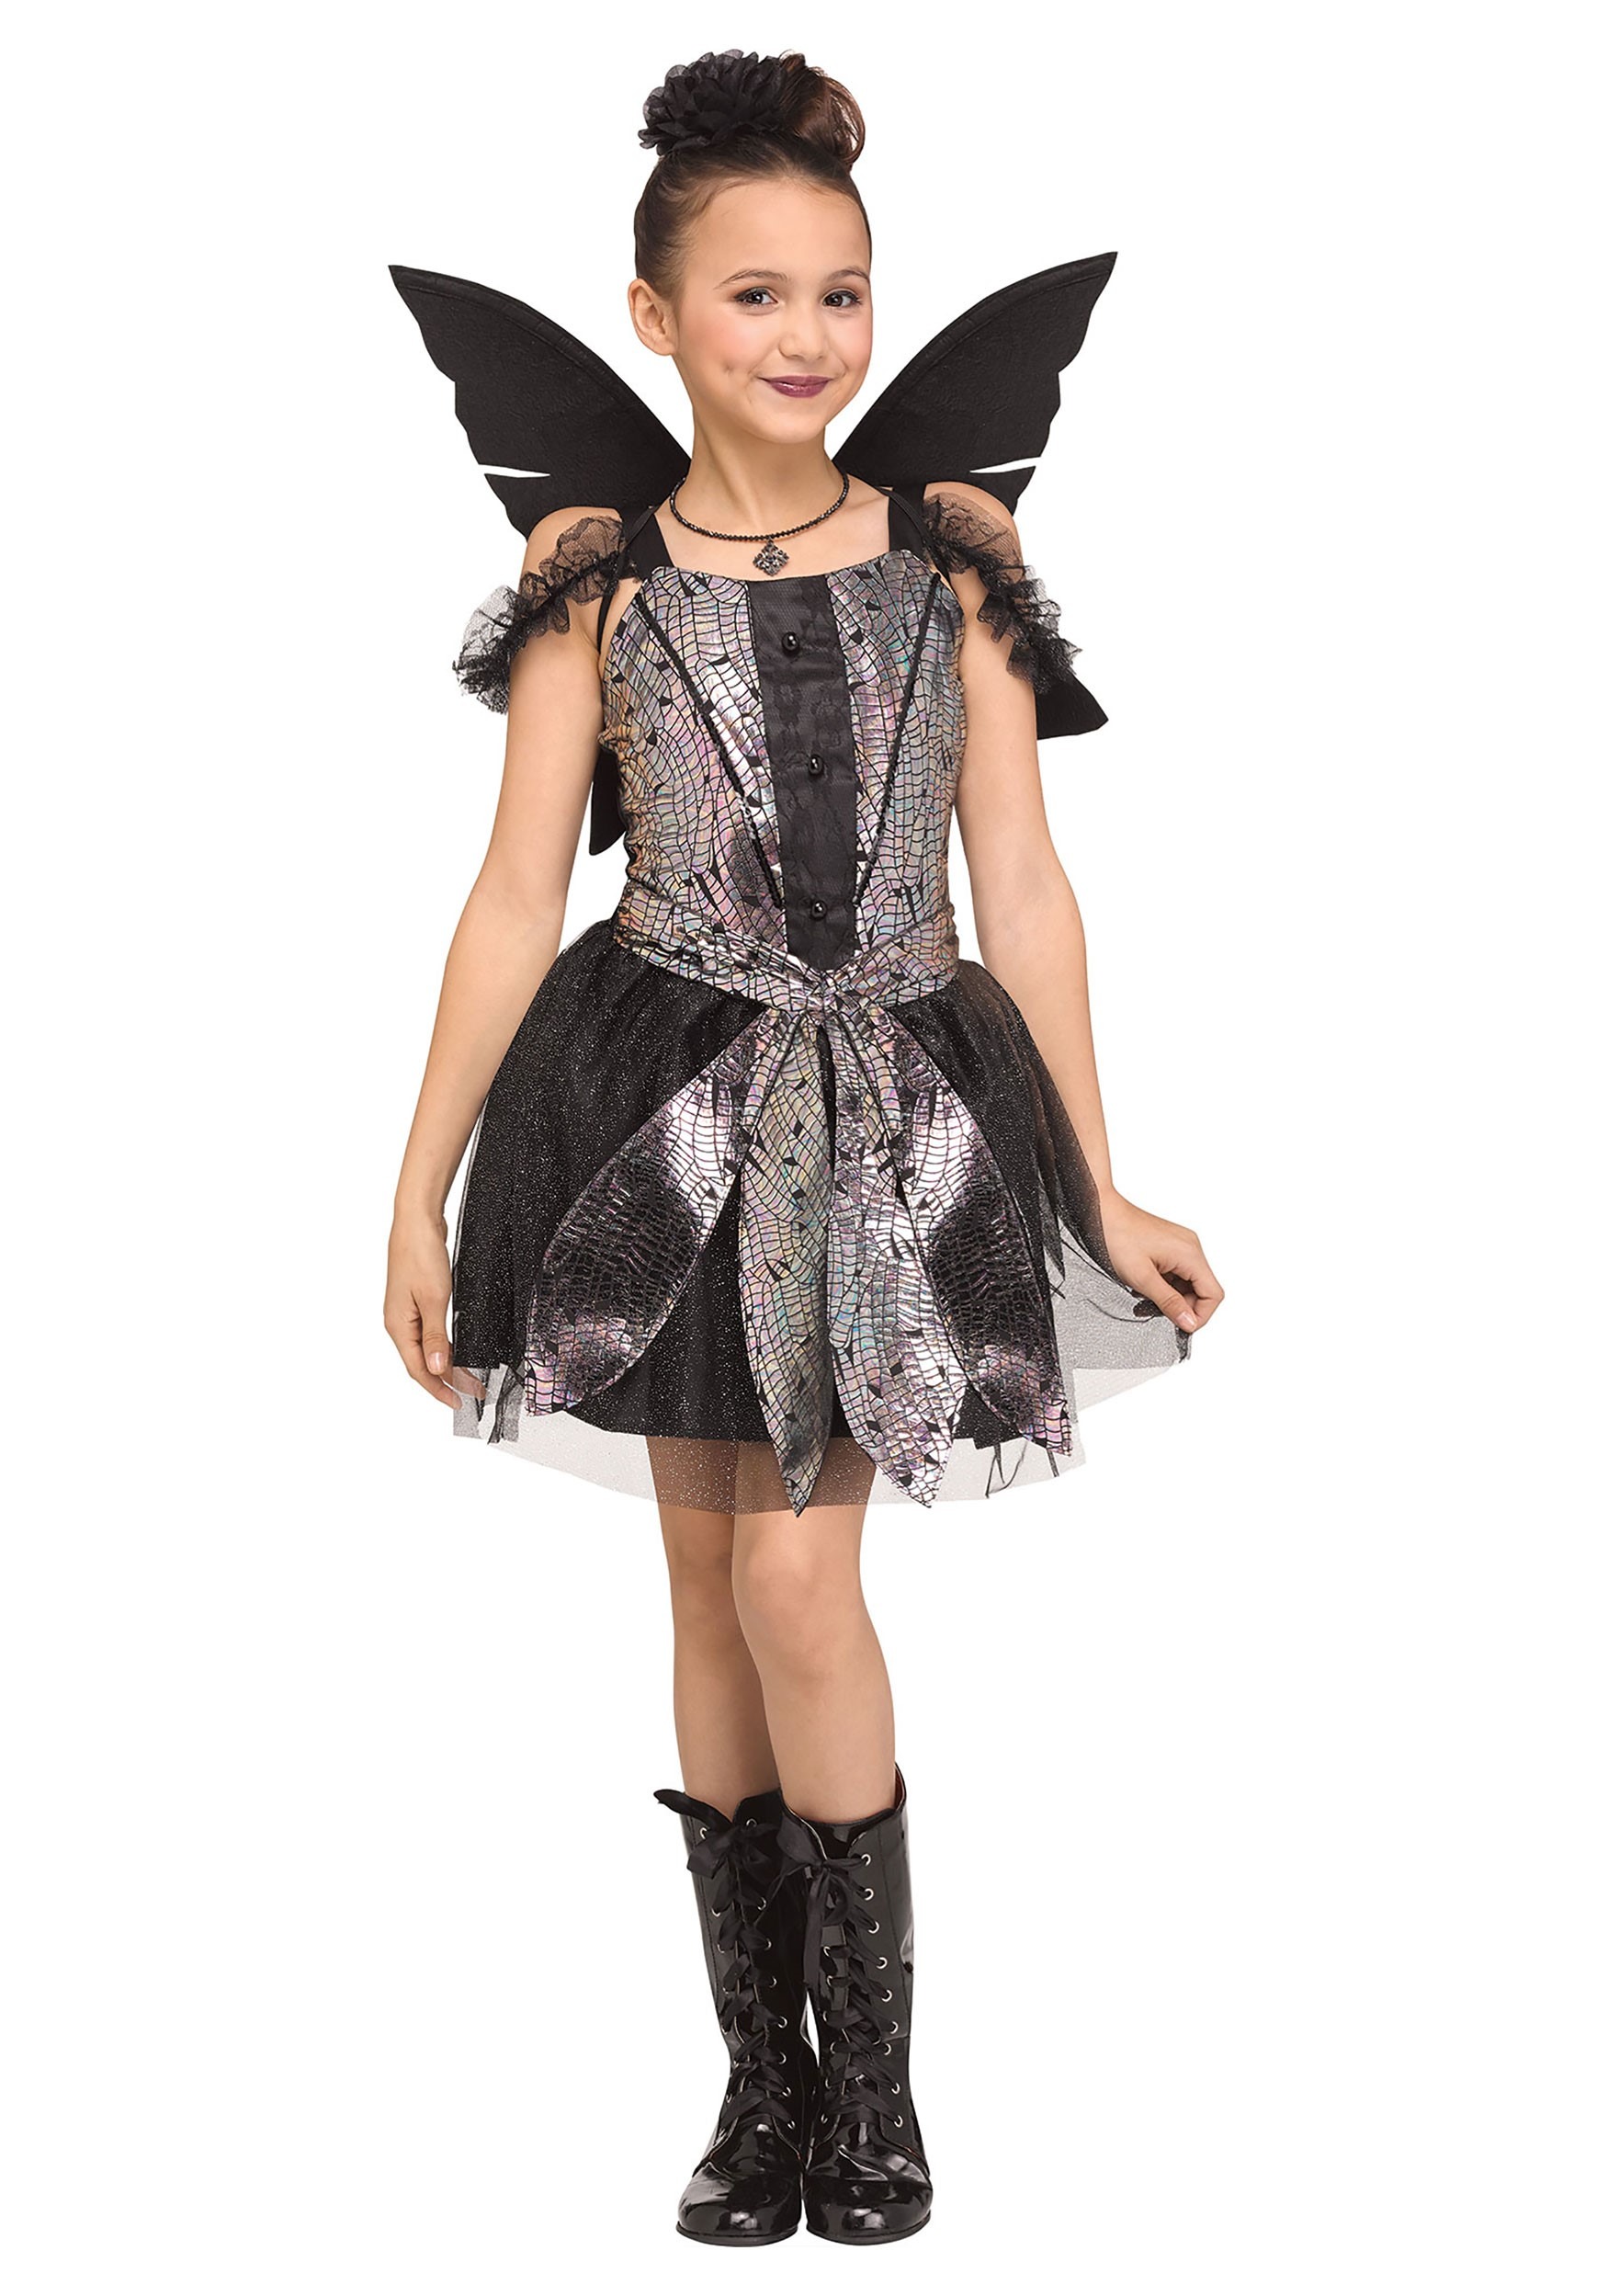 Girls Red Riding Hood Fairy Witch Halloween Costume Dress Hat Boot Tops 4-6 8-10